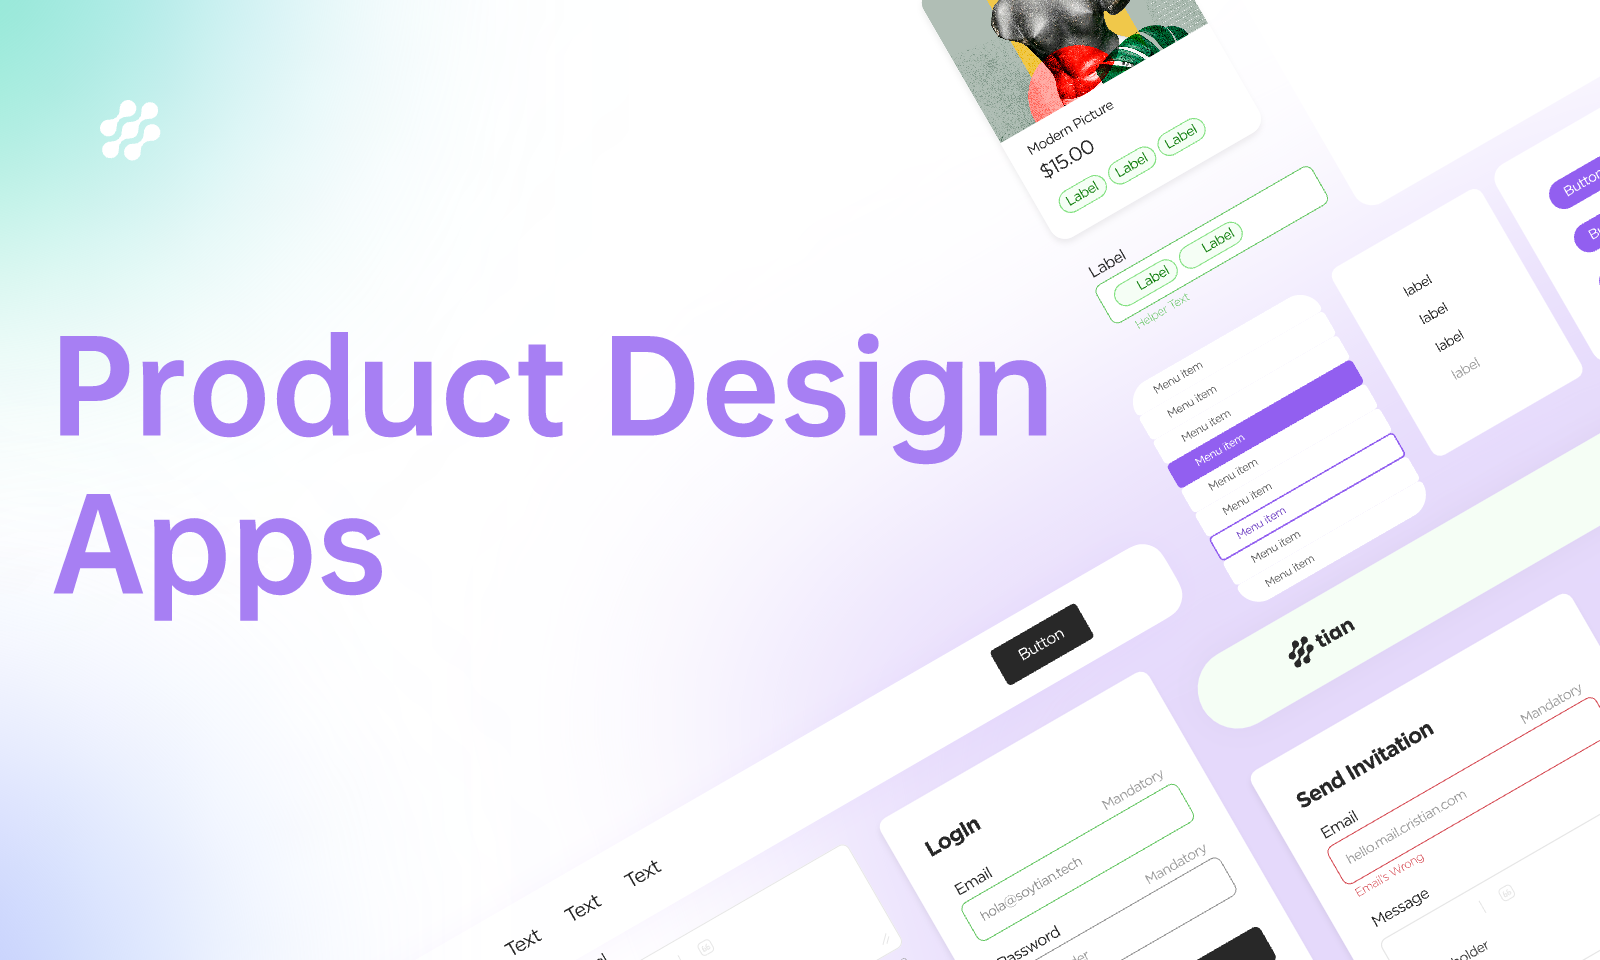  [Newest] Top 8 Product Design Apps